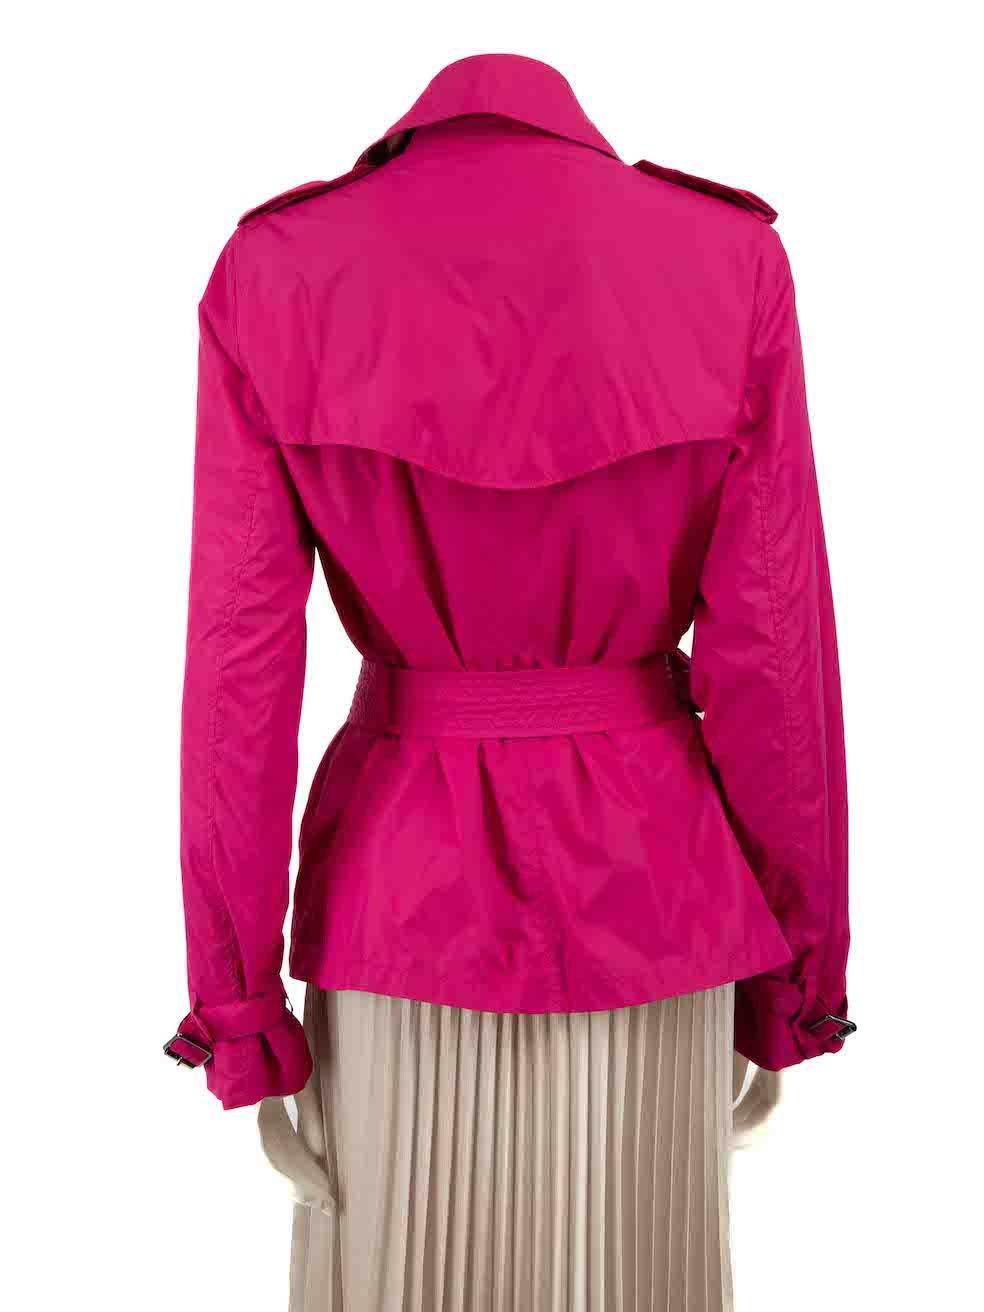 Burberry Pink Belted Double Breasted Jacket Size M In Good Condition For Sale In London, GB